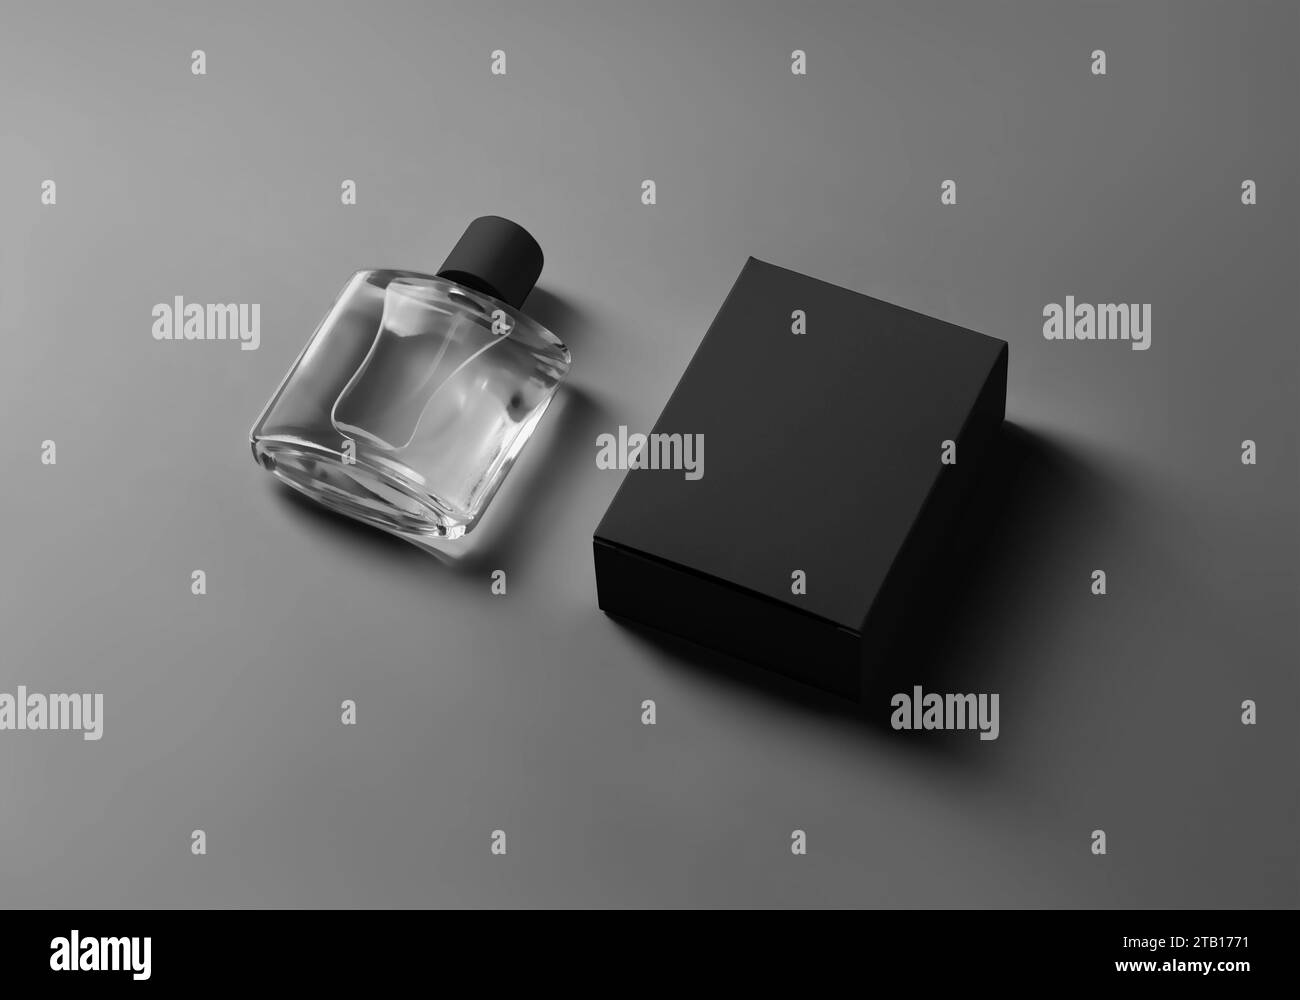 Template of a black box, transparent glass perfume vial with a lid, isolated on a background with shadows. Product photo for design, branding. Mockup Stock Photo